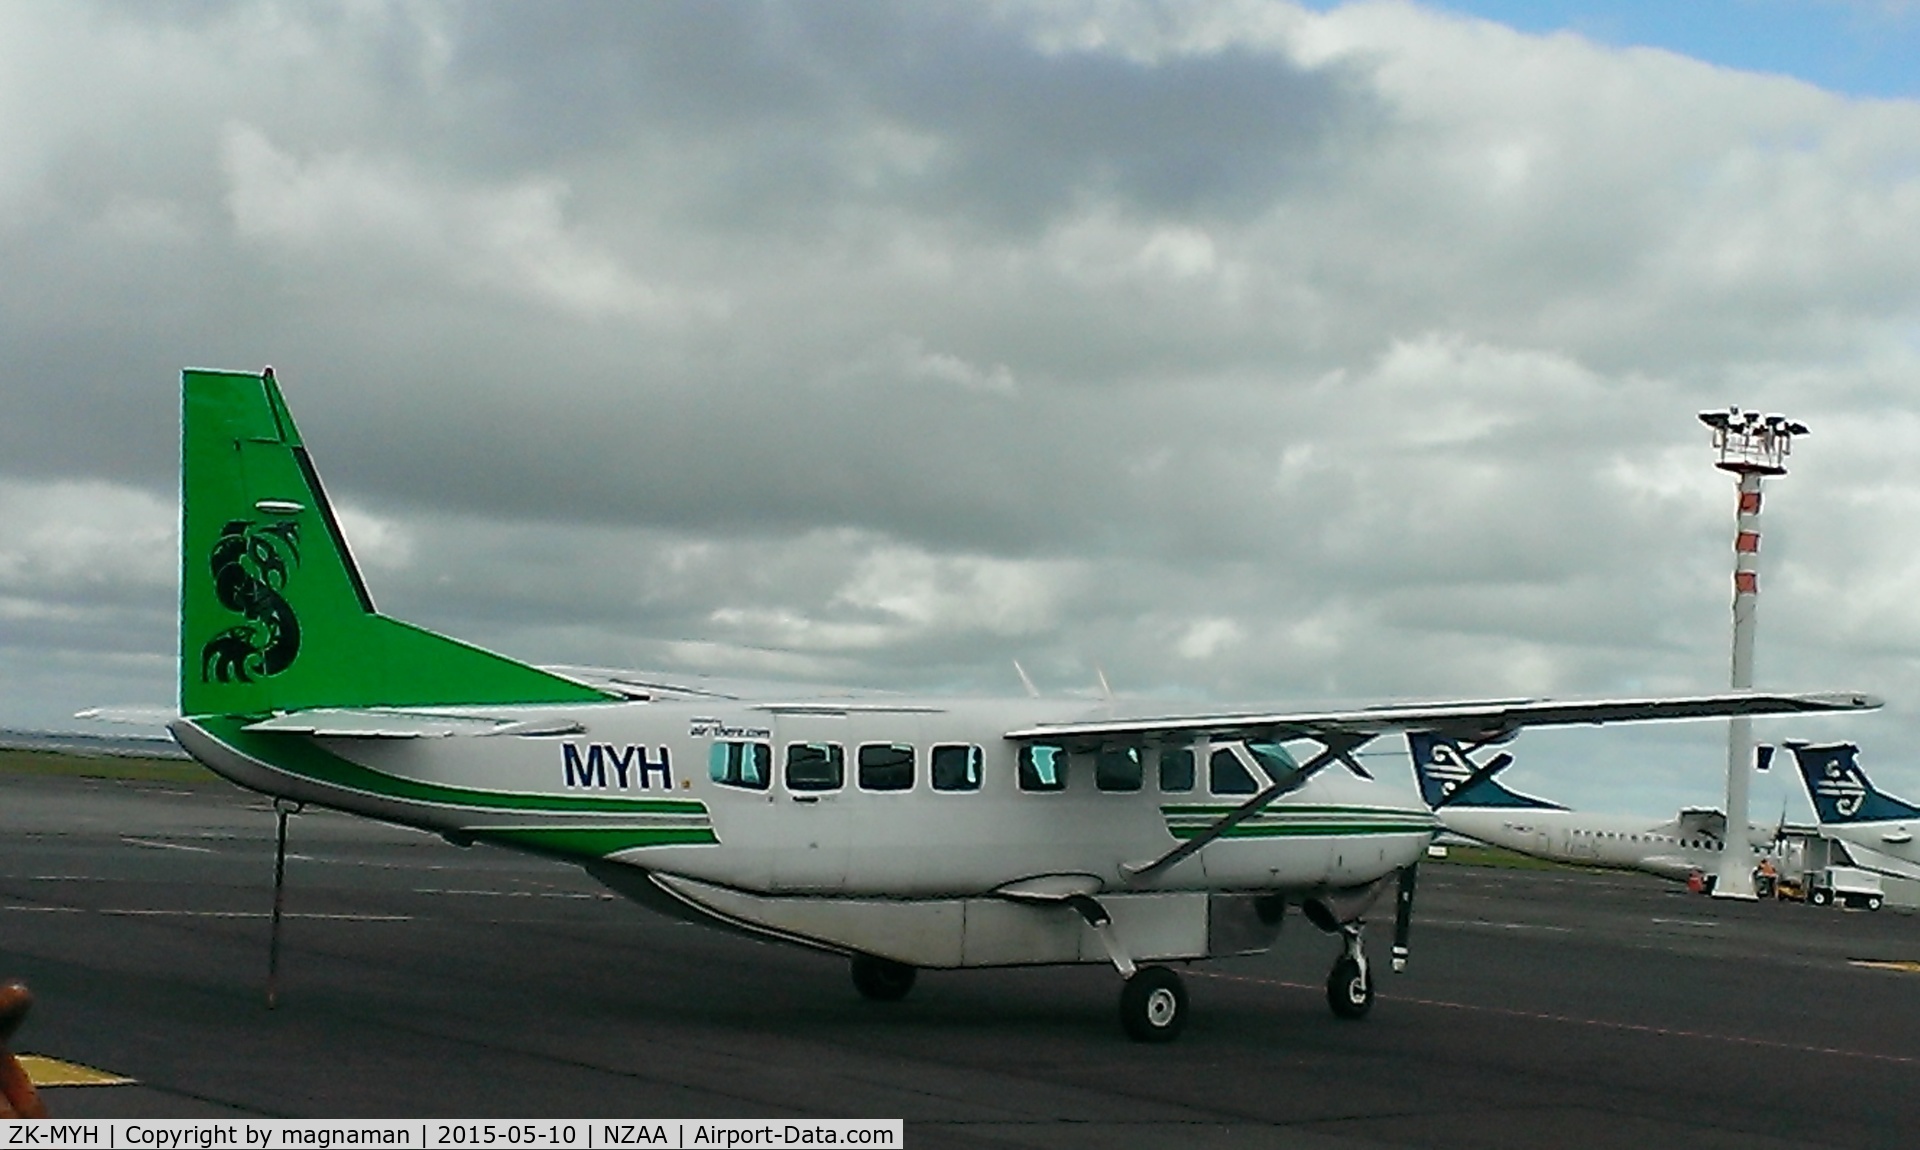 ZK-MYH, 1997 Cessna 208B Grand Caravan C/N 208B0604, operating for great barrier airlines